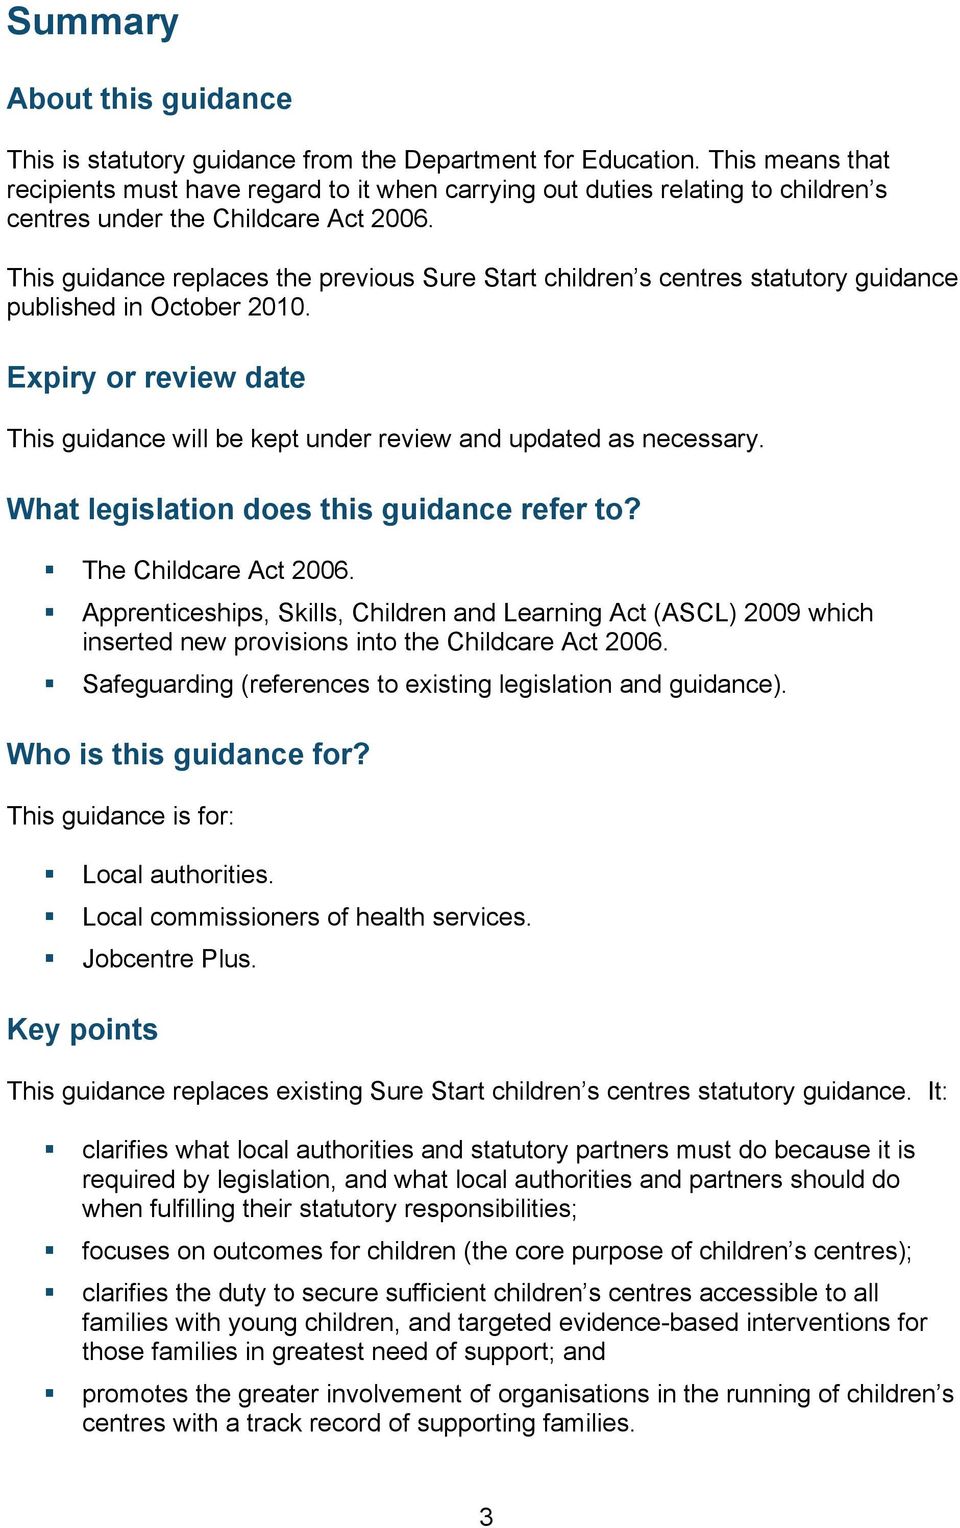 This guidance replaces the previous Sure Start children s centres statutory guidance published in October 2010. Expiry or review date This guidance will be kept under review and updated as necessary.